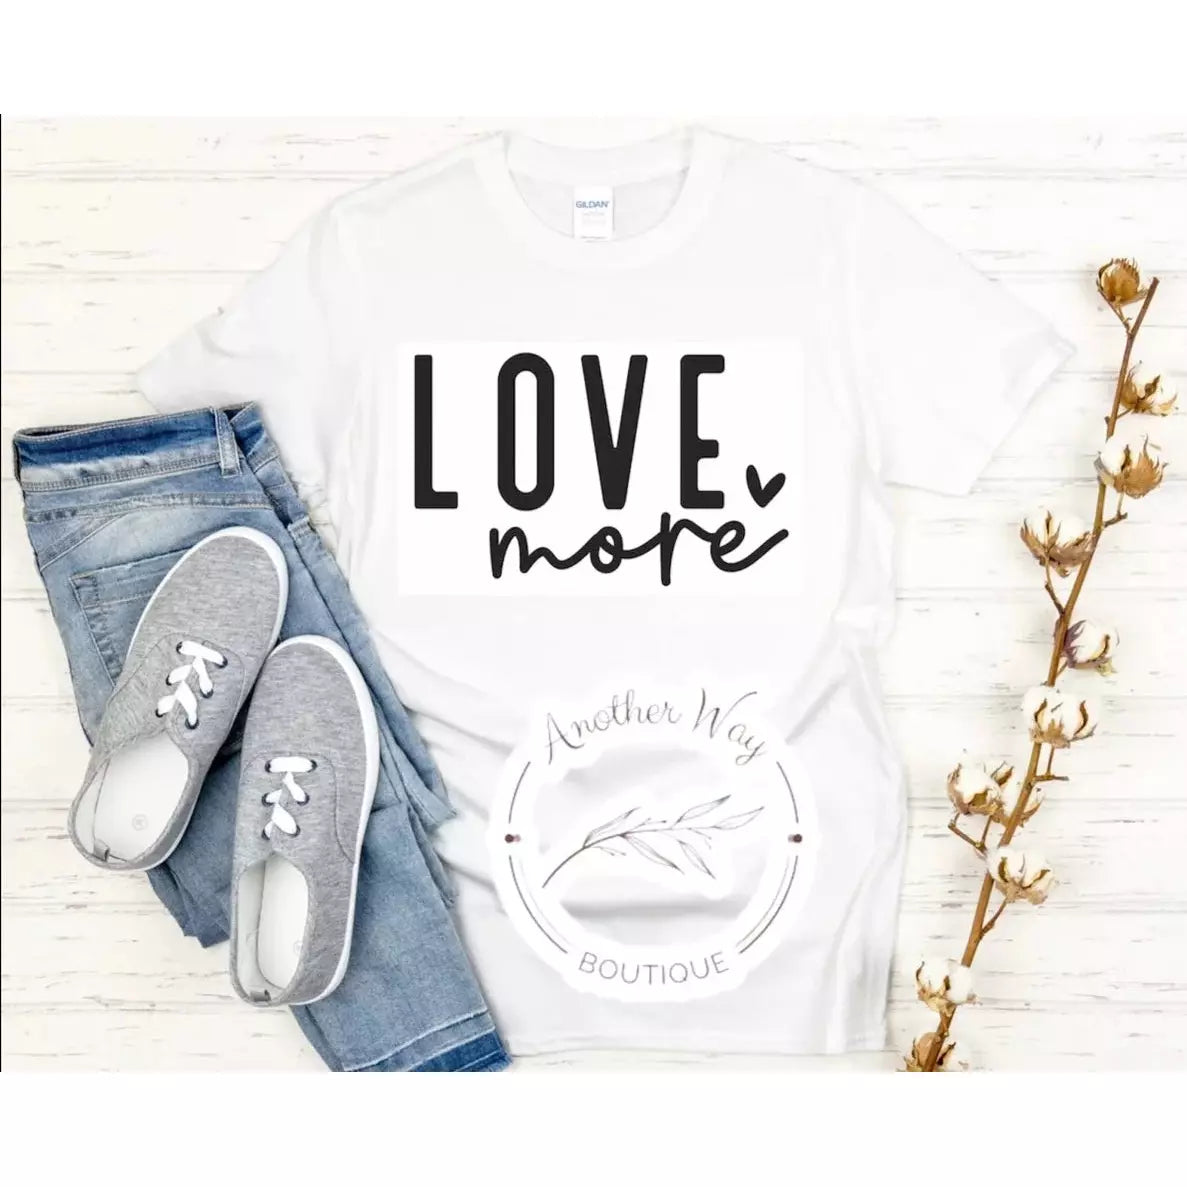 "Love More" - Another Way Boutique